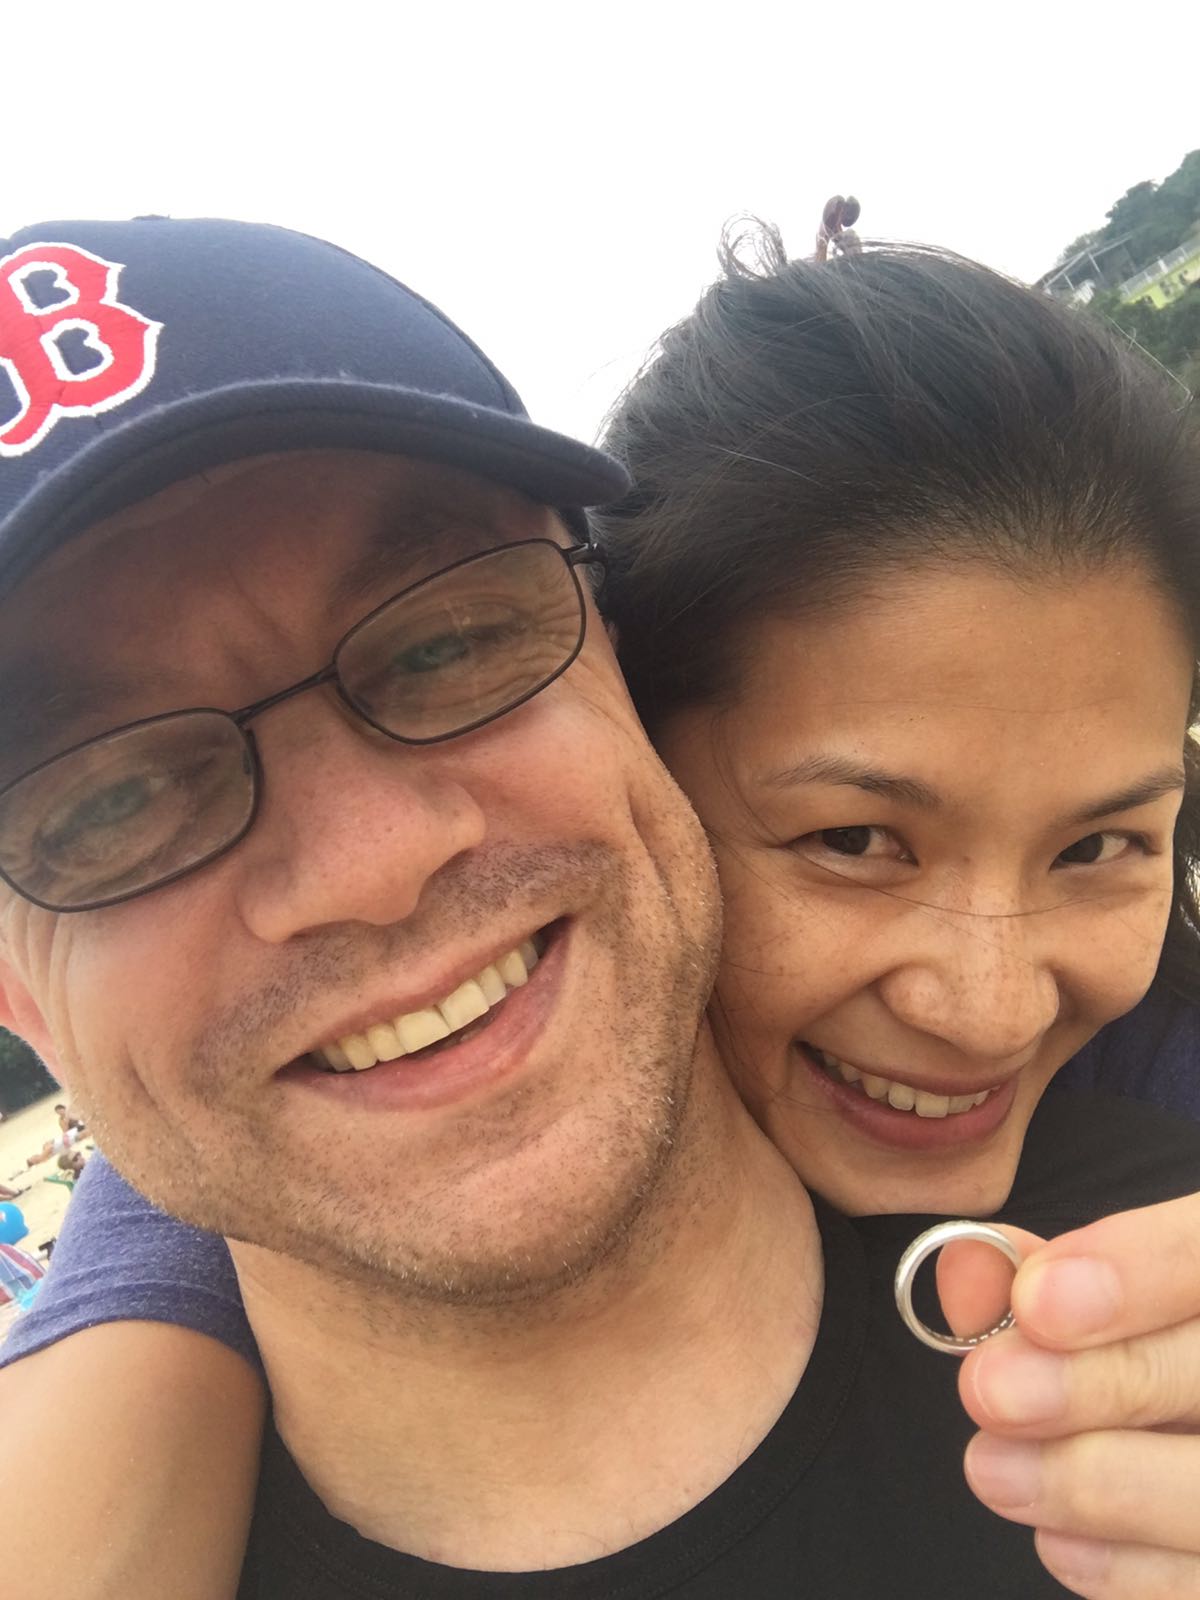 Ring lost on a Hong Kong beach. Happy recovery!